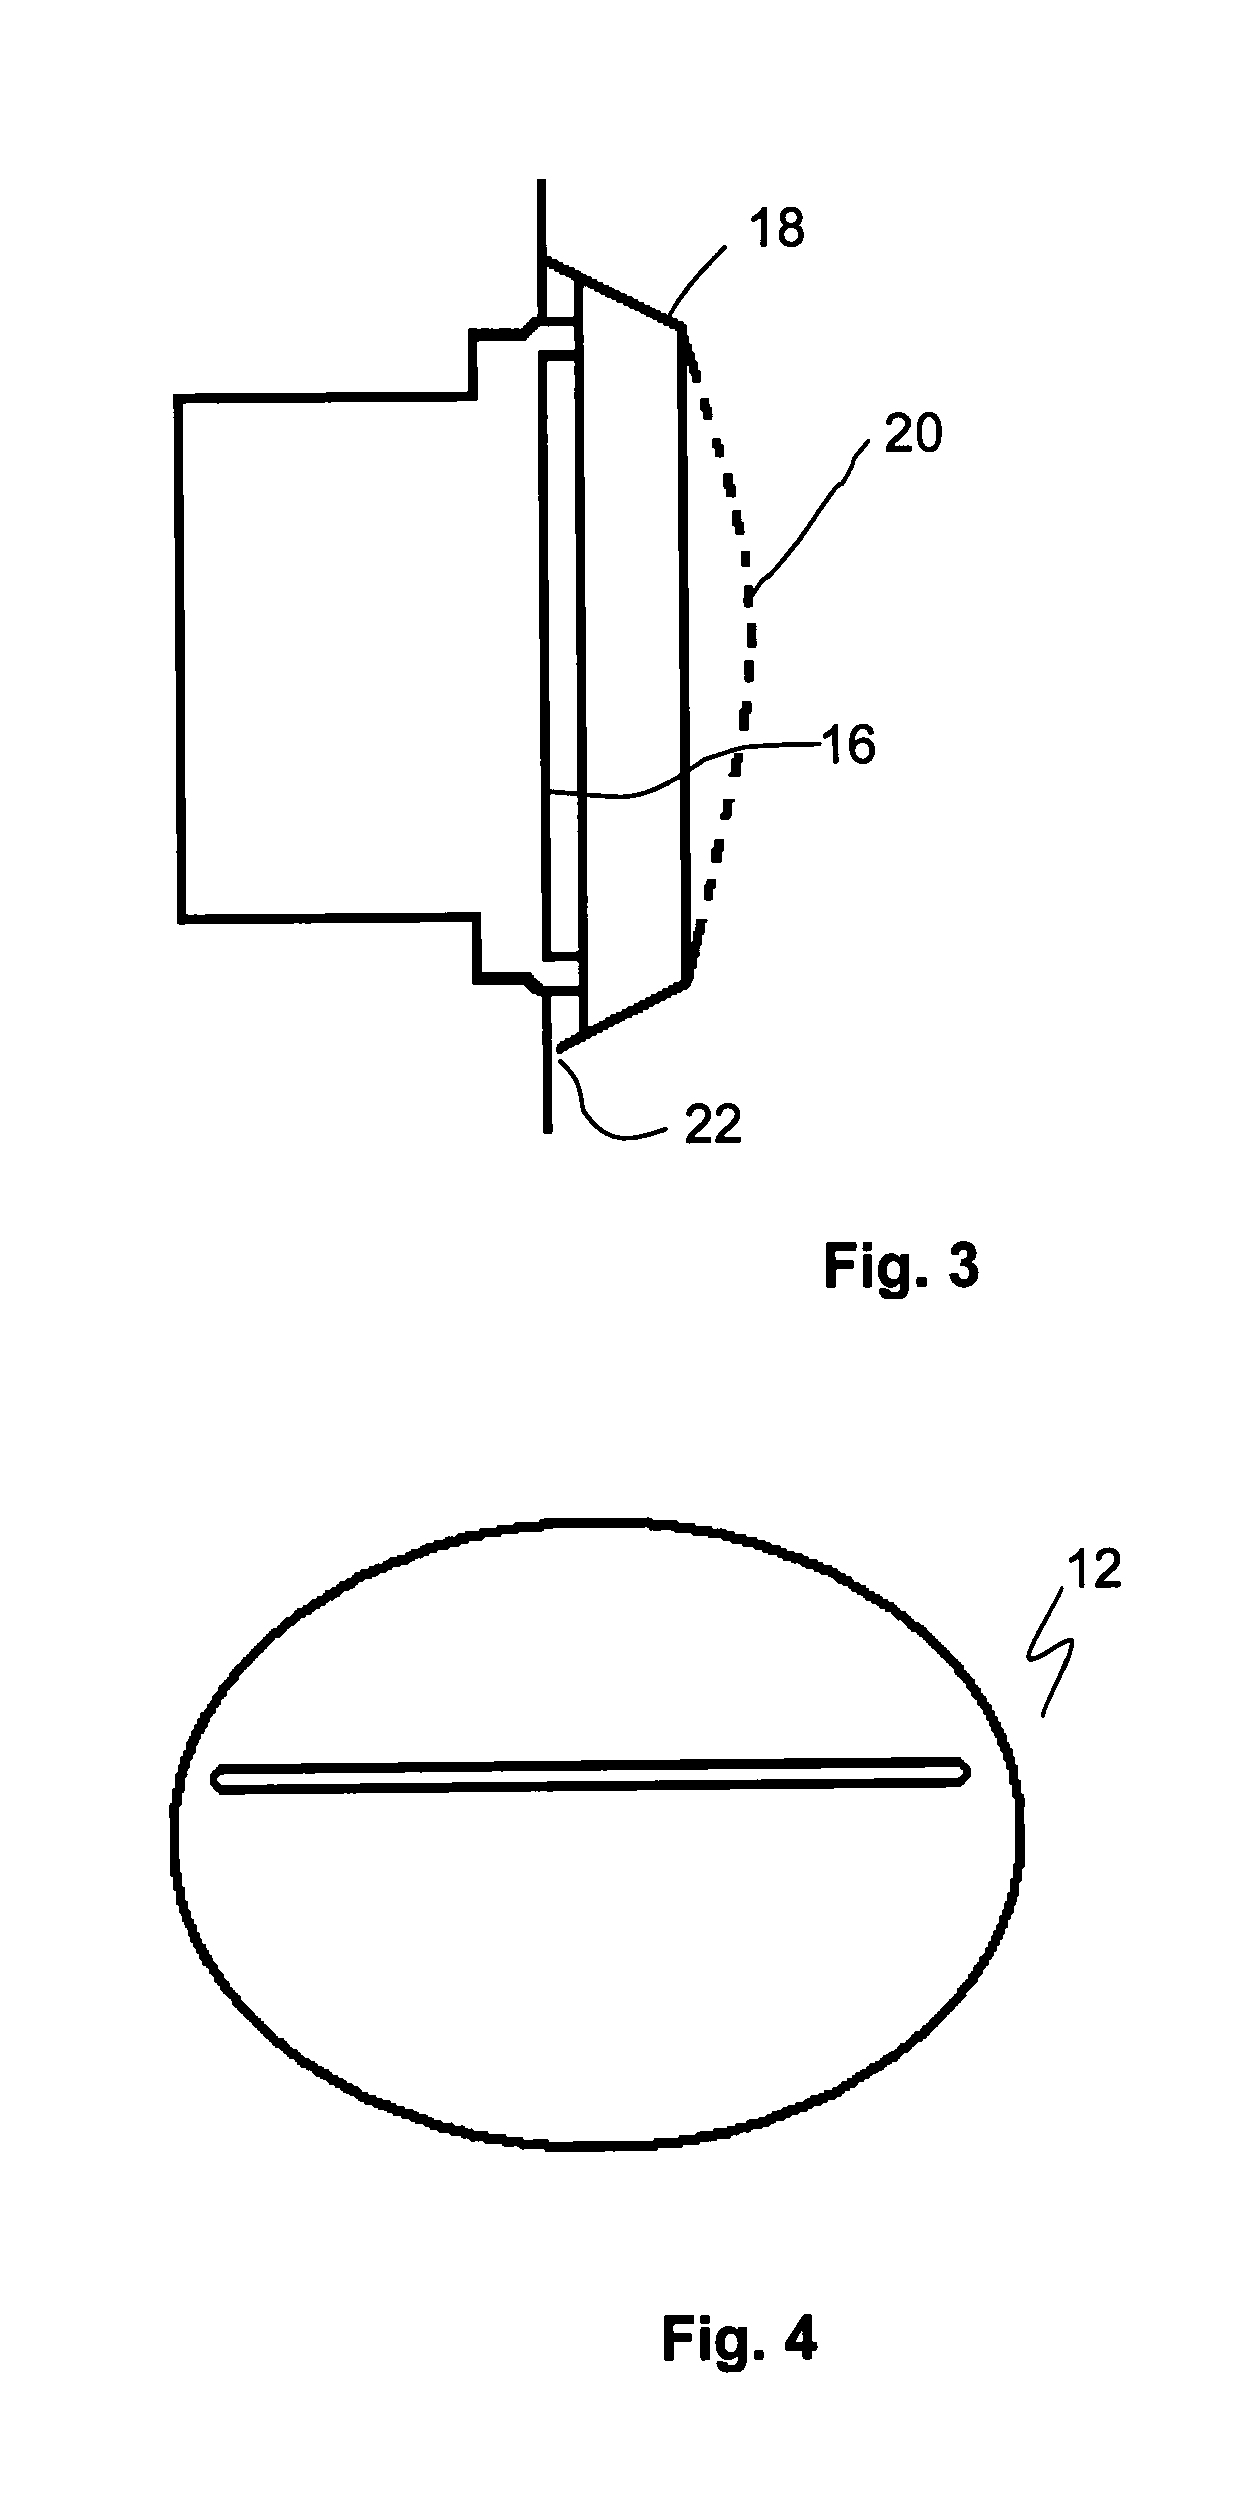 Method and apparatus for preventing a build up of snow or dust